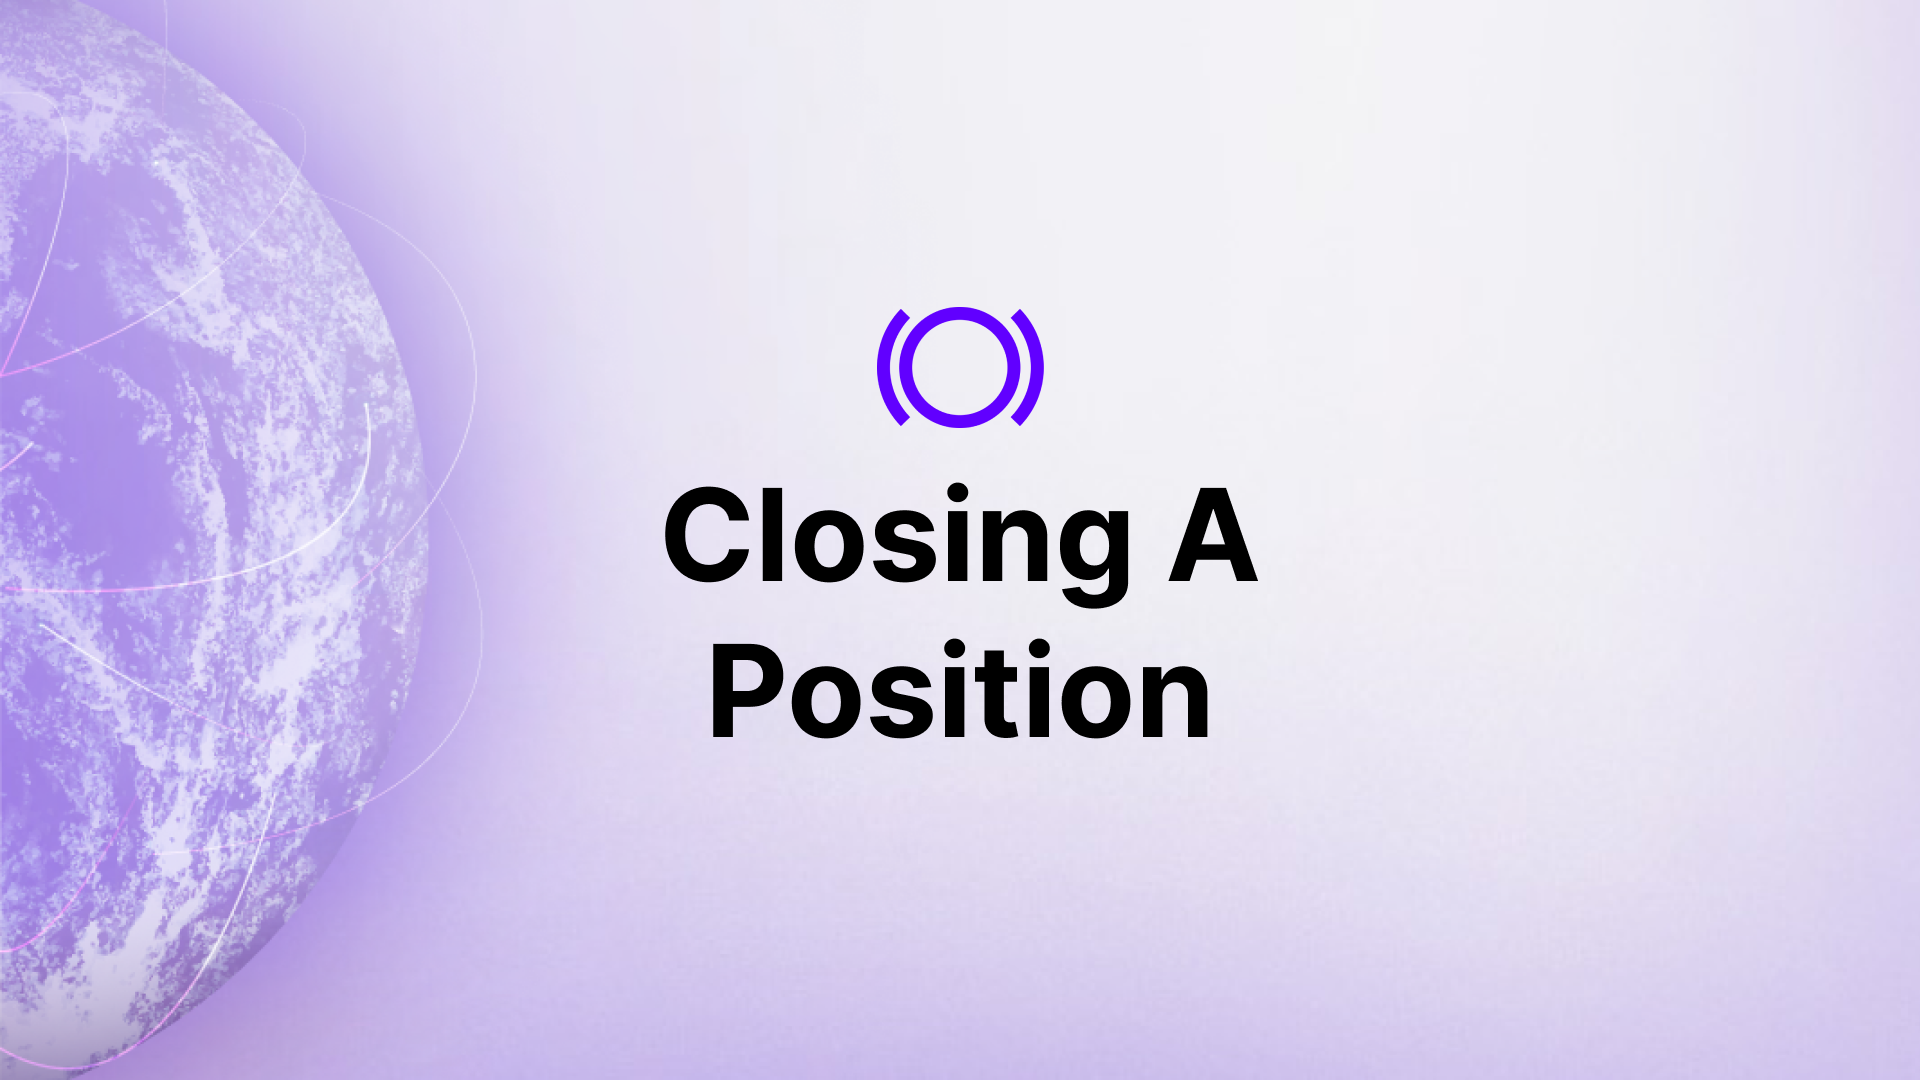 Closing a Position